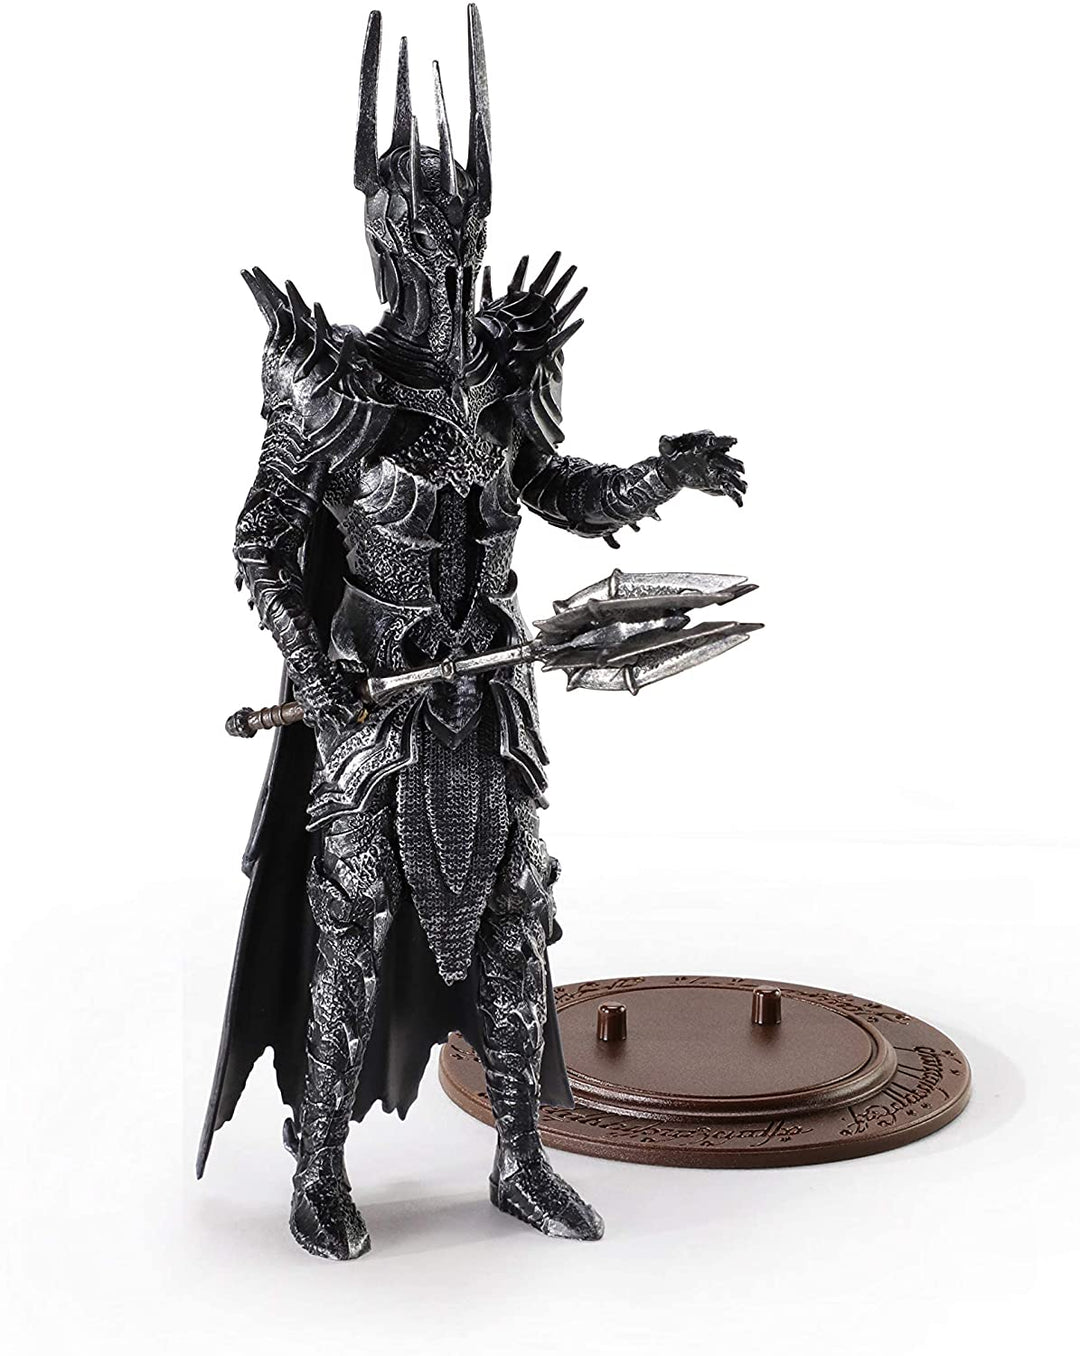 The Noble Collection LoTR Bendyfigs Sauron - Officially Licensed 19cm (7.5 inch) Lord Of The Rings Bendable Posable Collectable Doll Figures With Stand